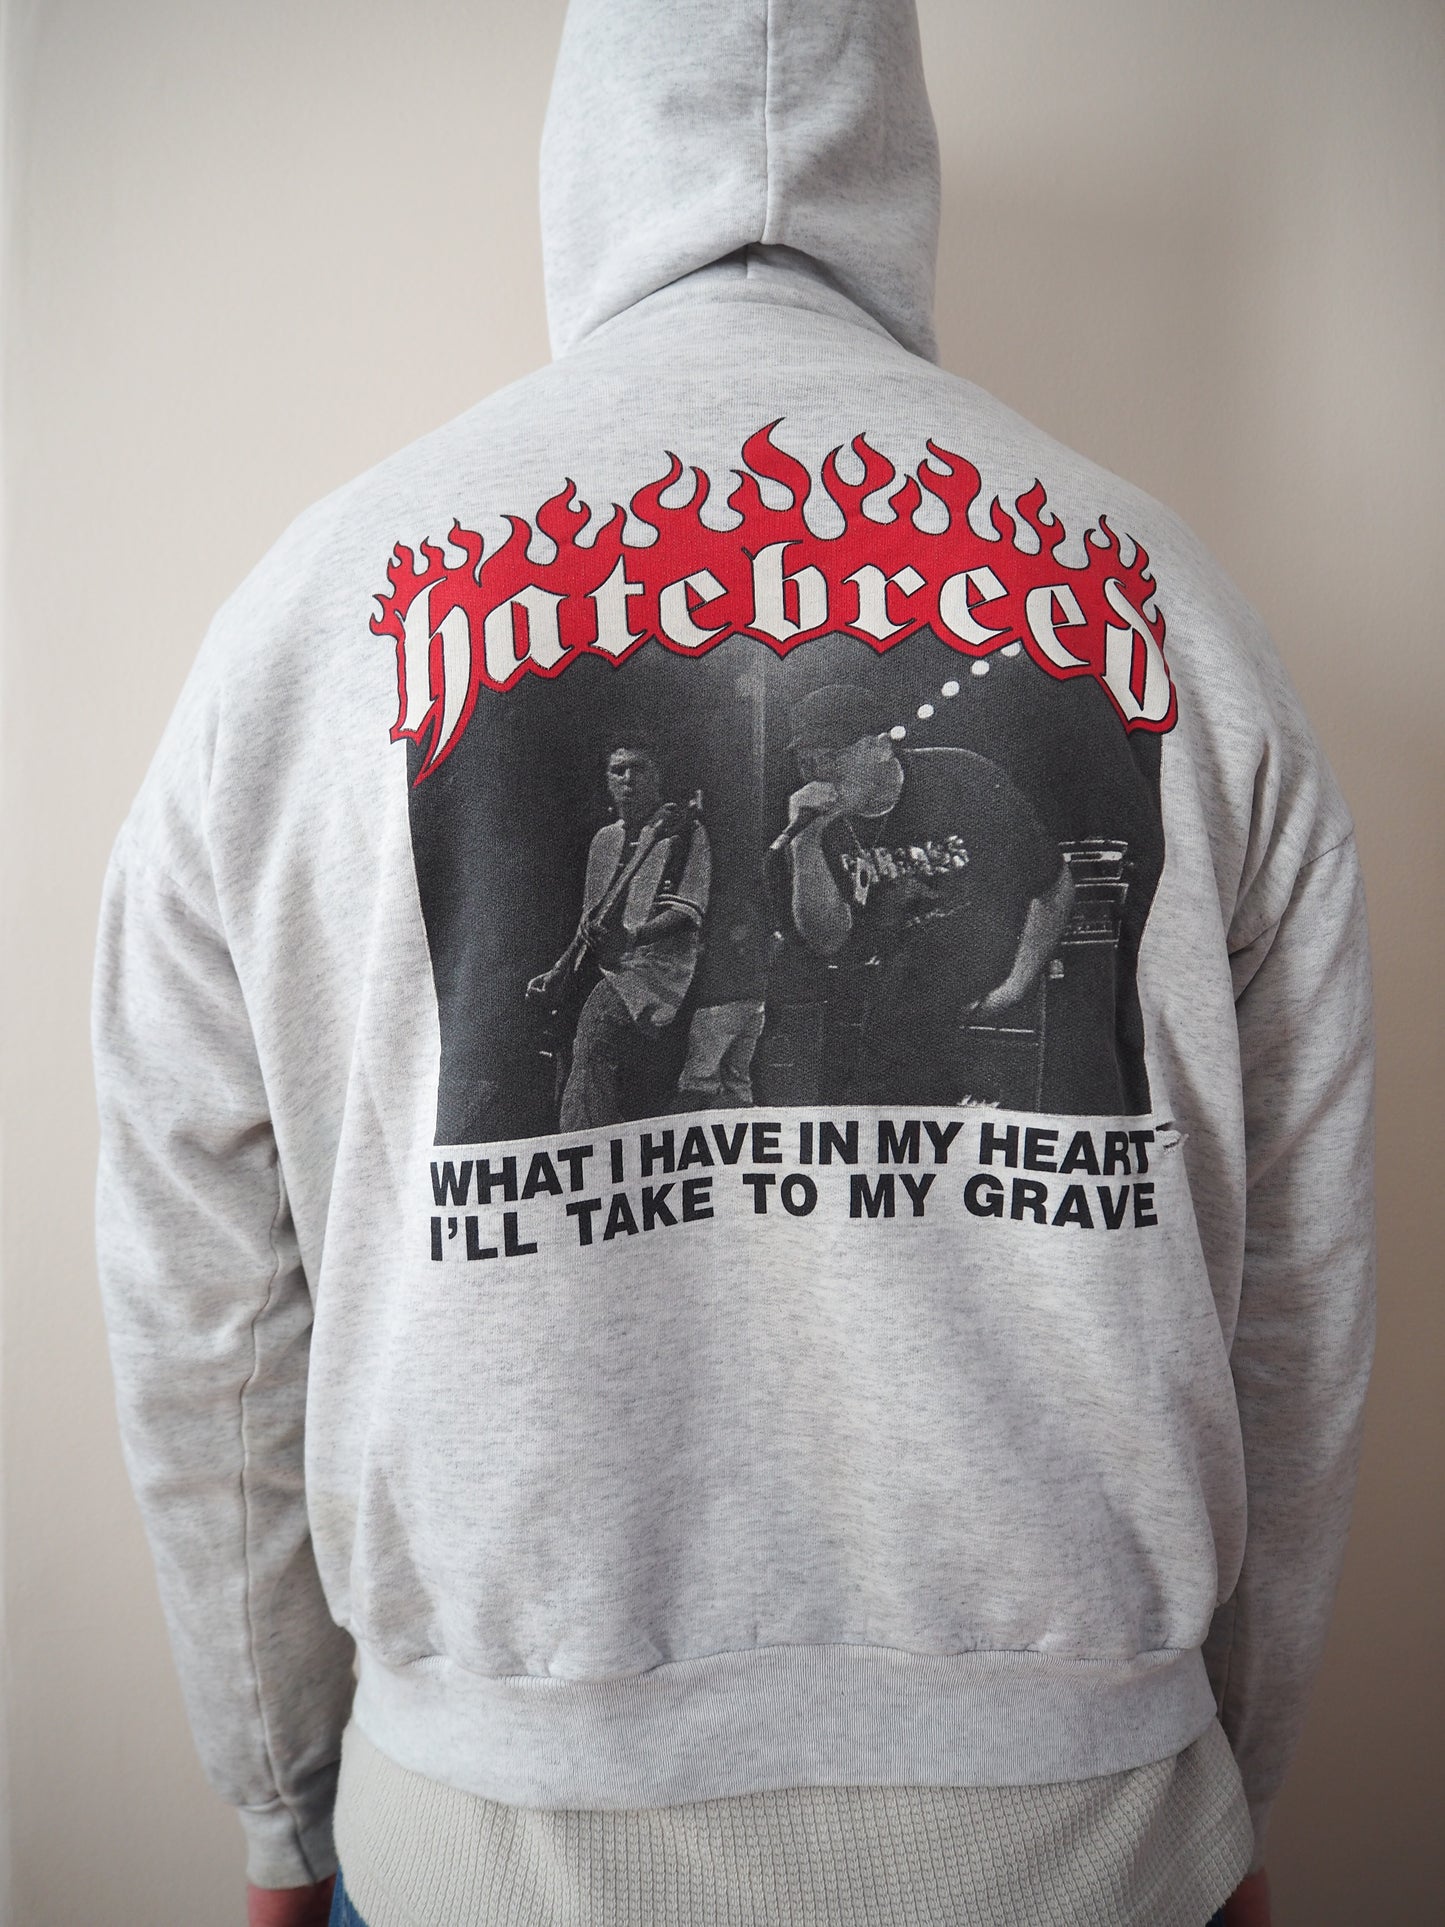 1997 Hatebreed "What I have in My Heart" Hoodie